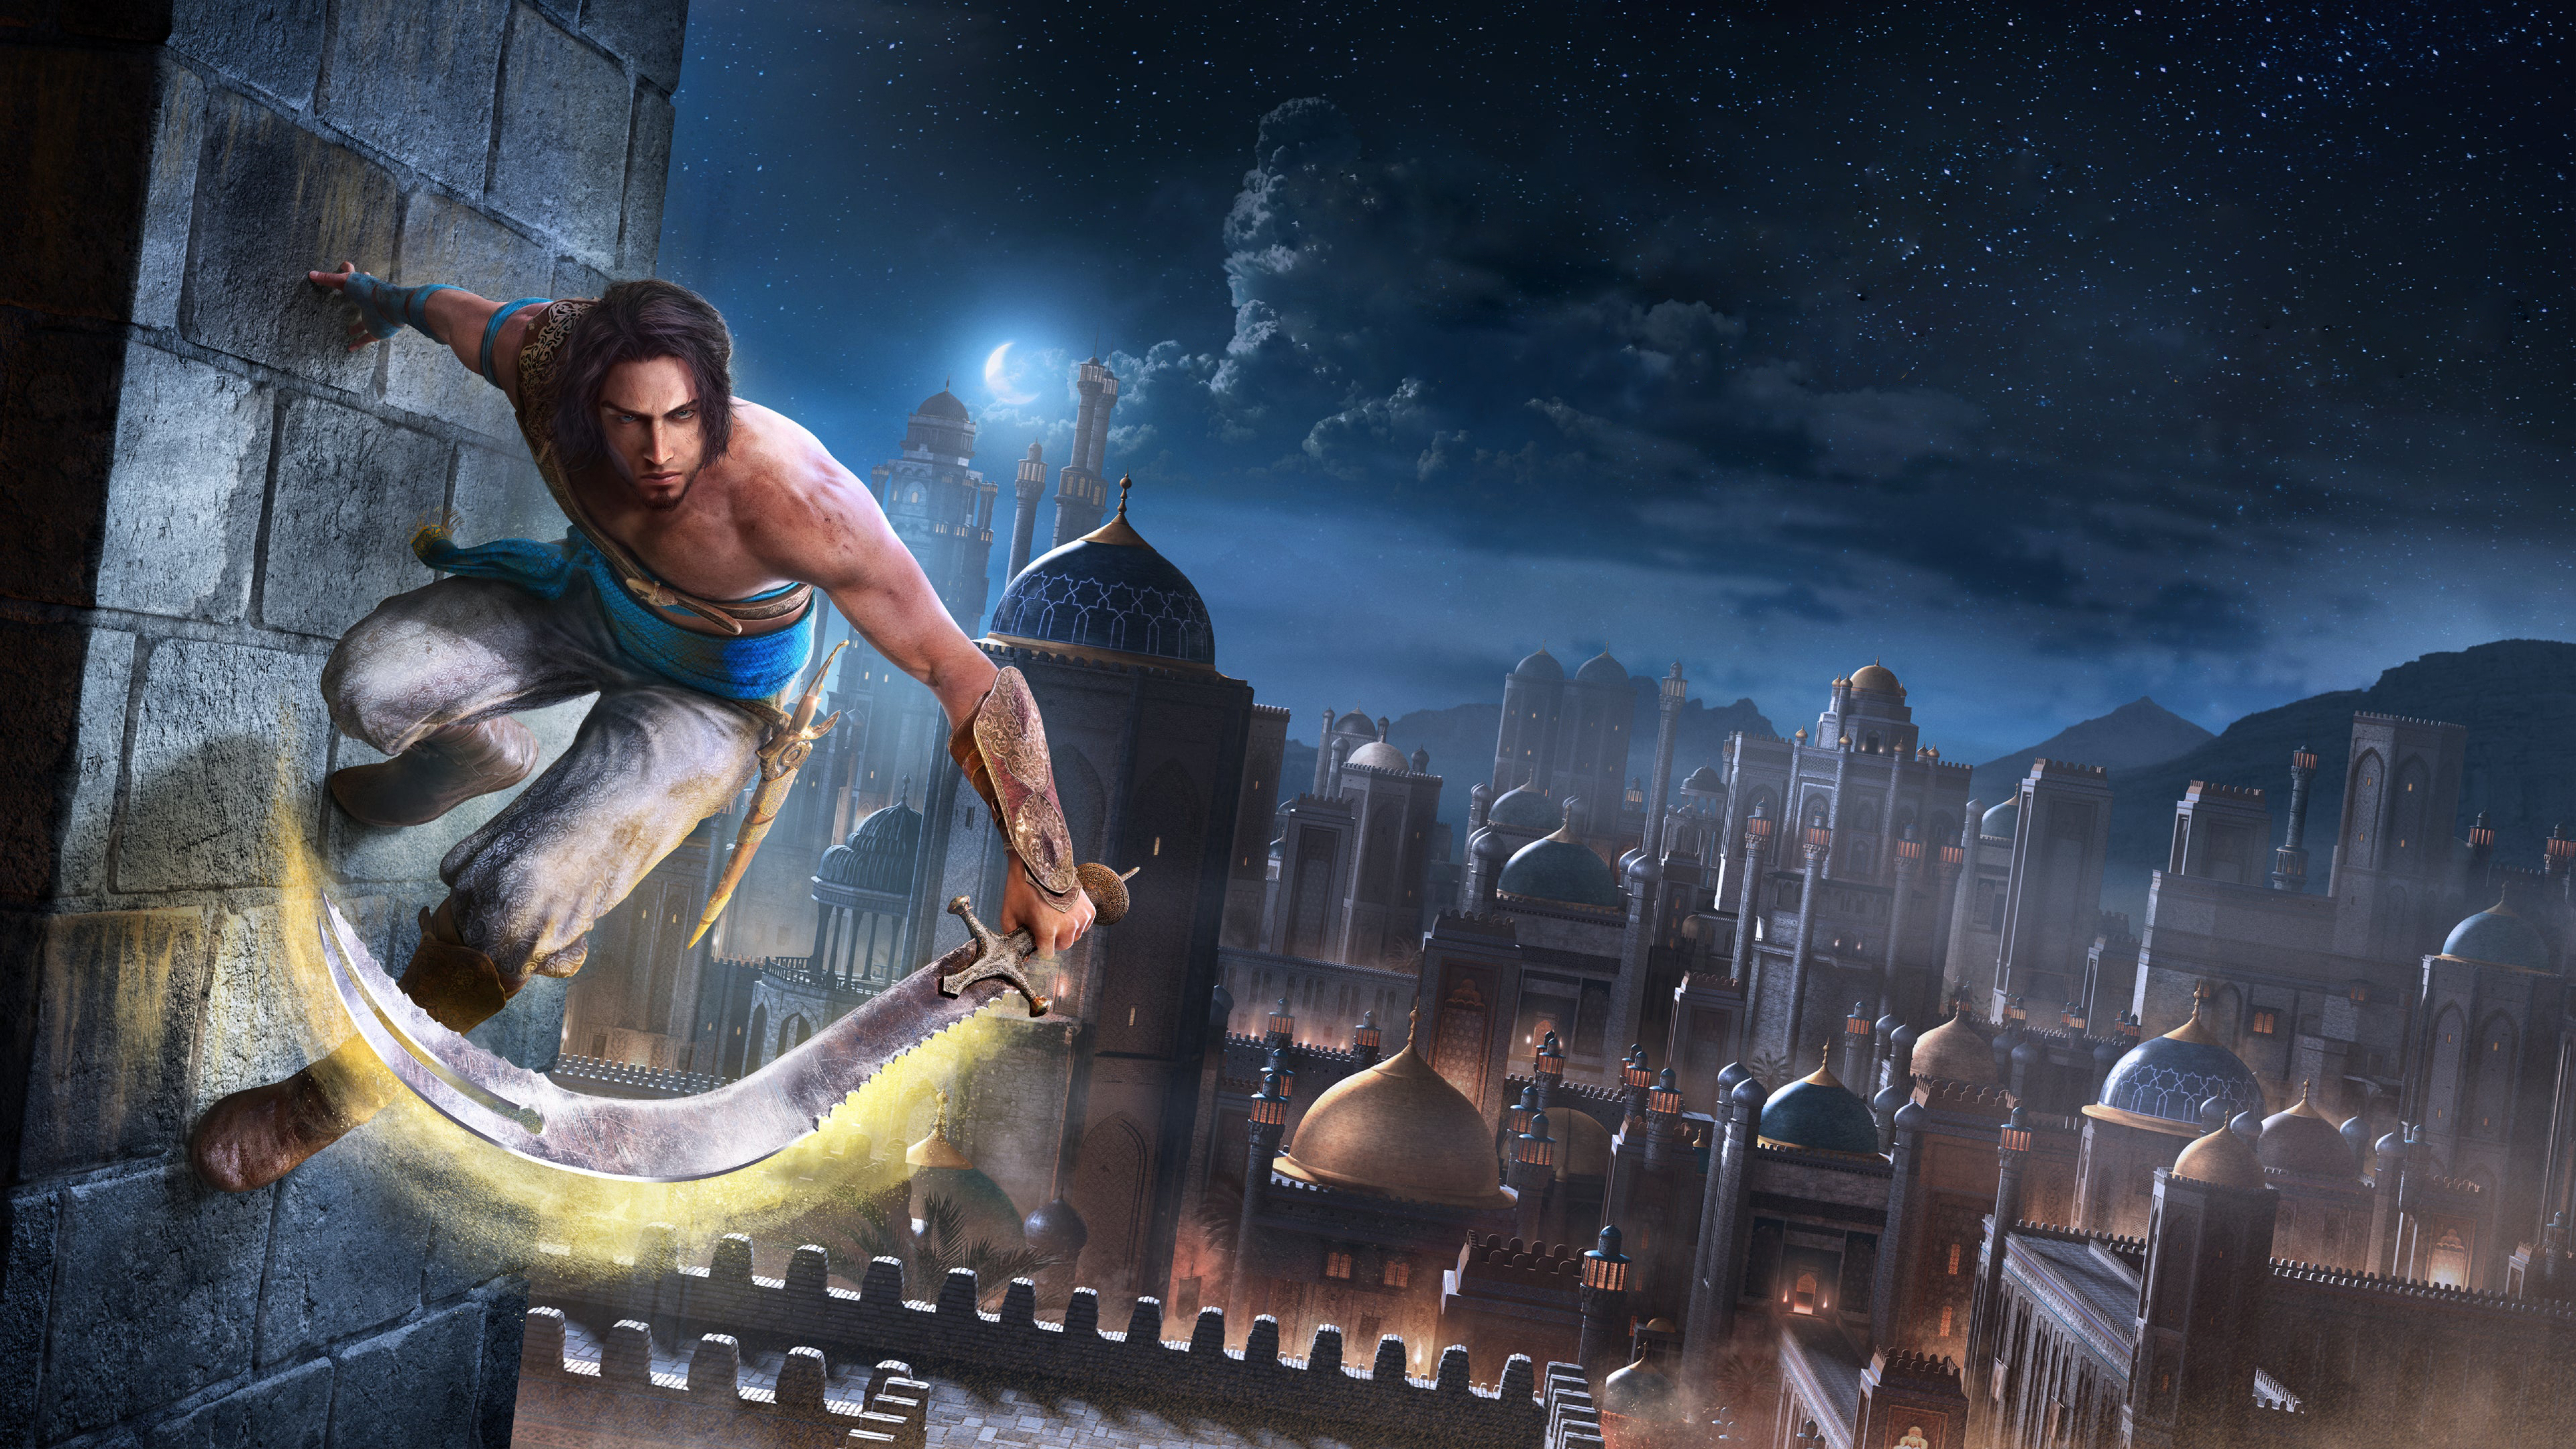 prince of persia 3d soundtrack